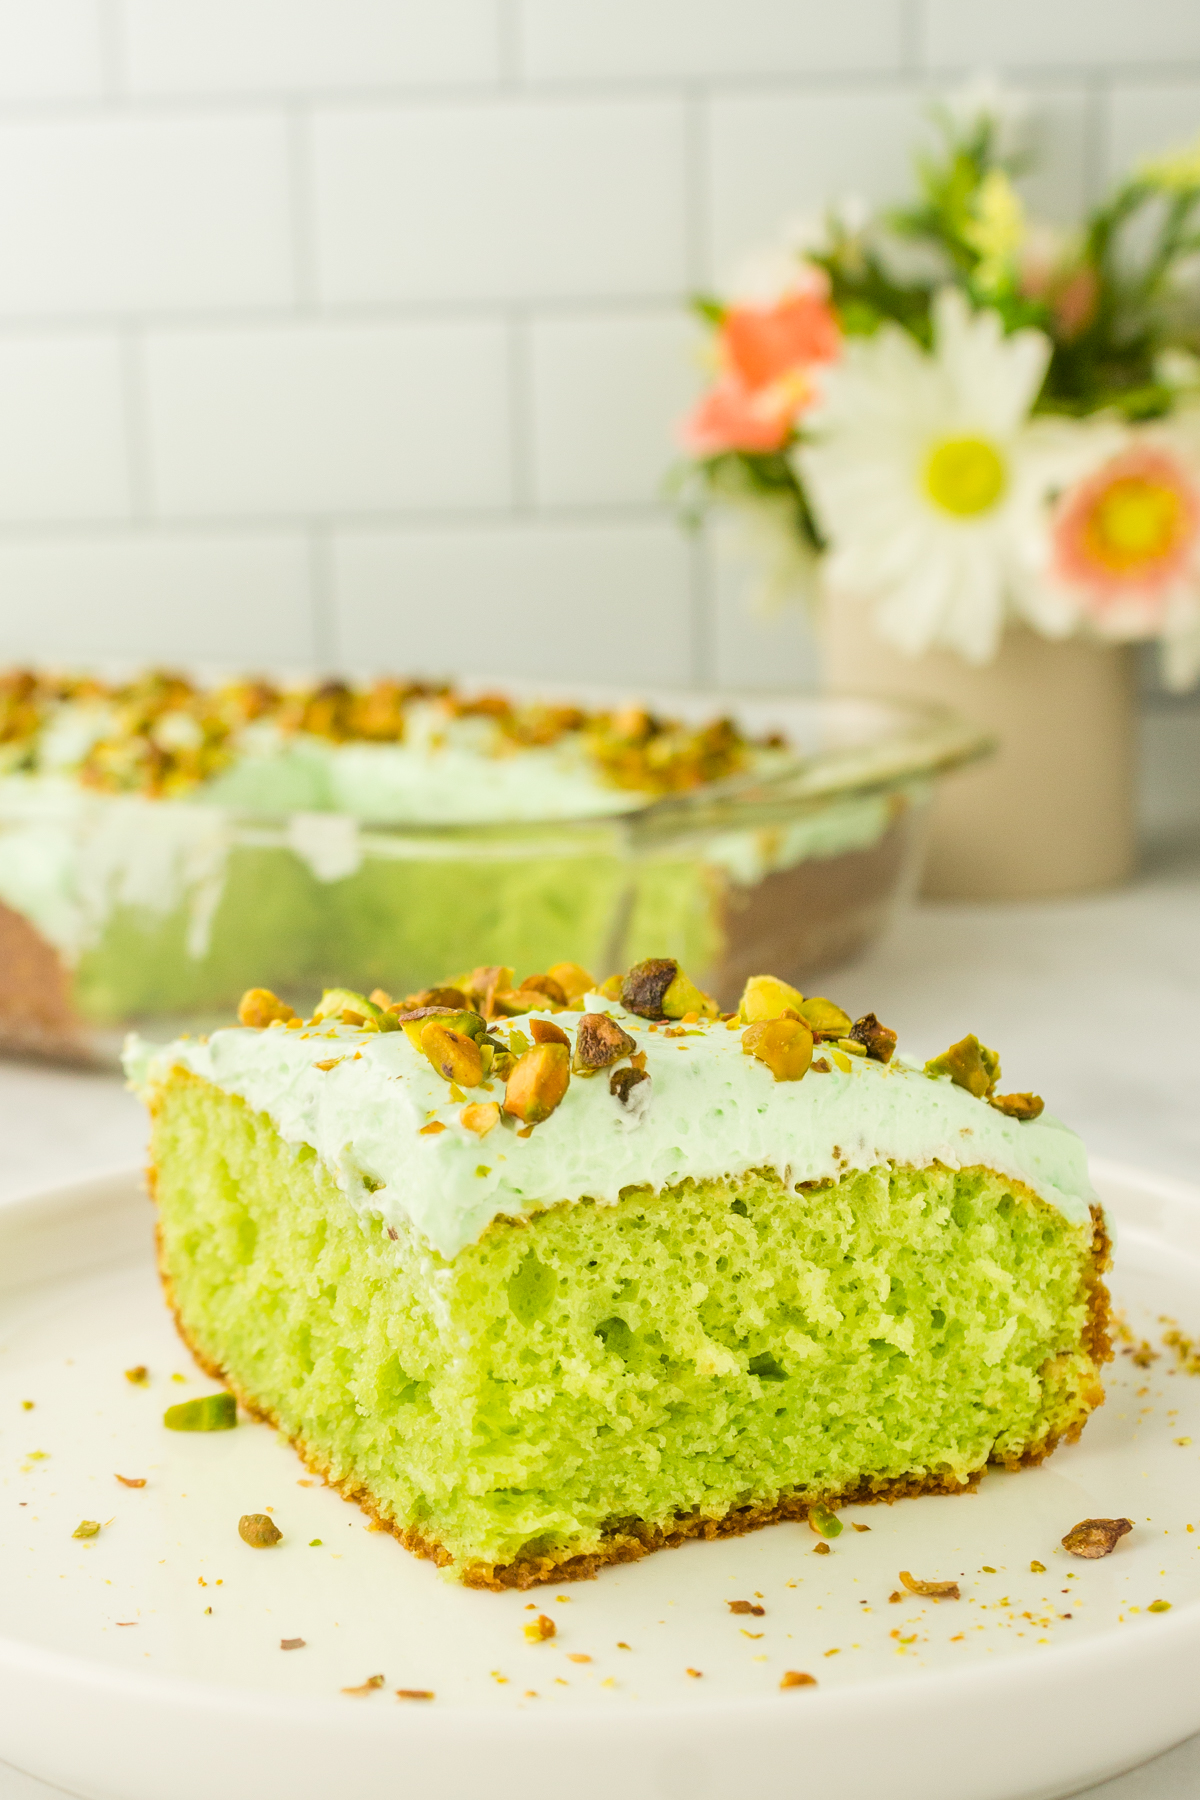 slice of pistachio cake on a plate is a simple dessert to serve